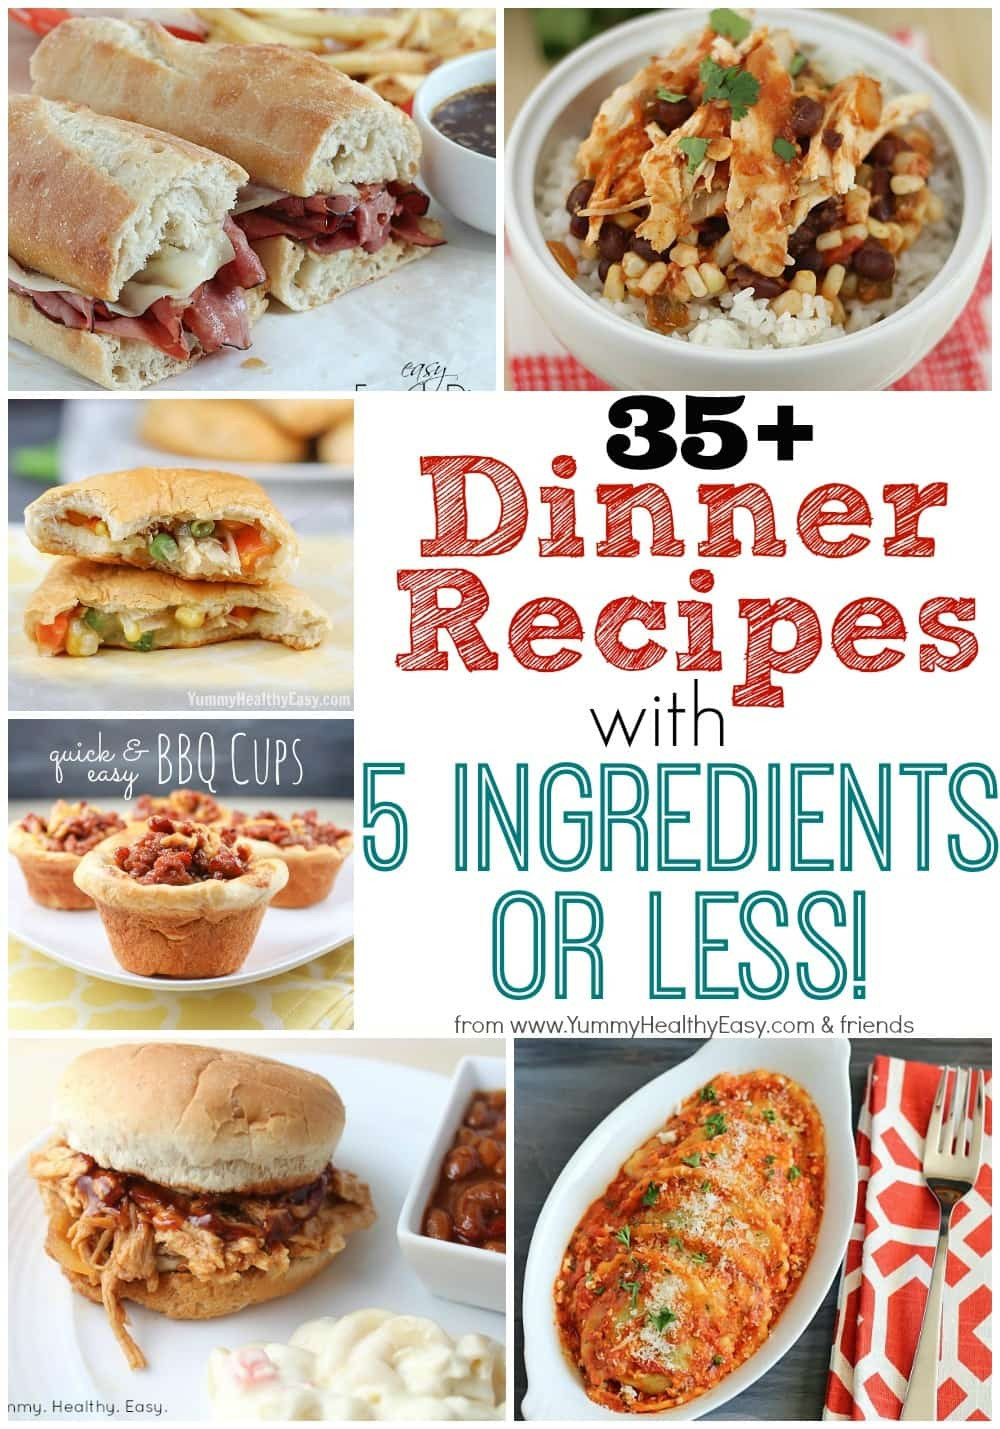 5 Ingredient Healthy Dinners
 35 Dinner Recipes with 5 Ingre nts or Less Yummy